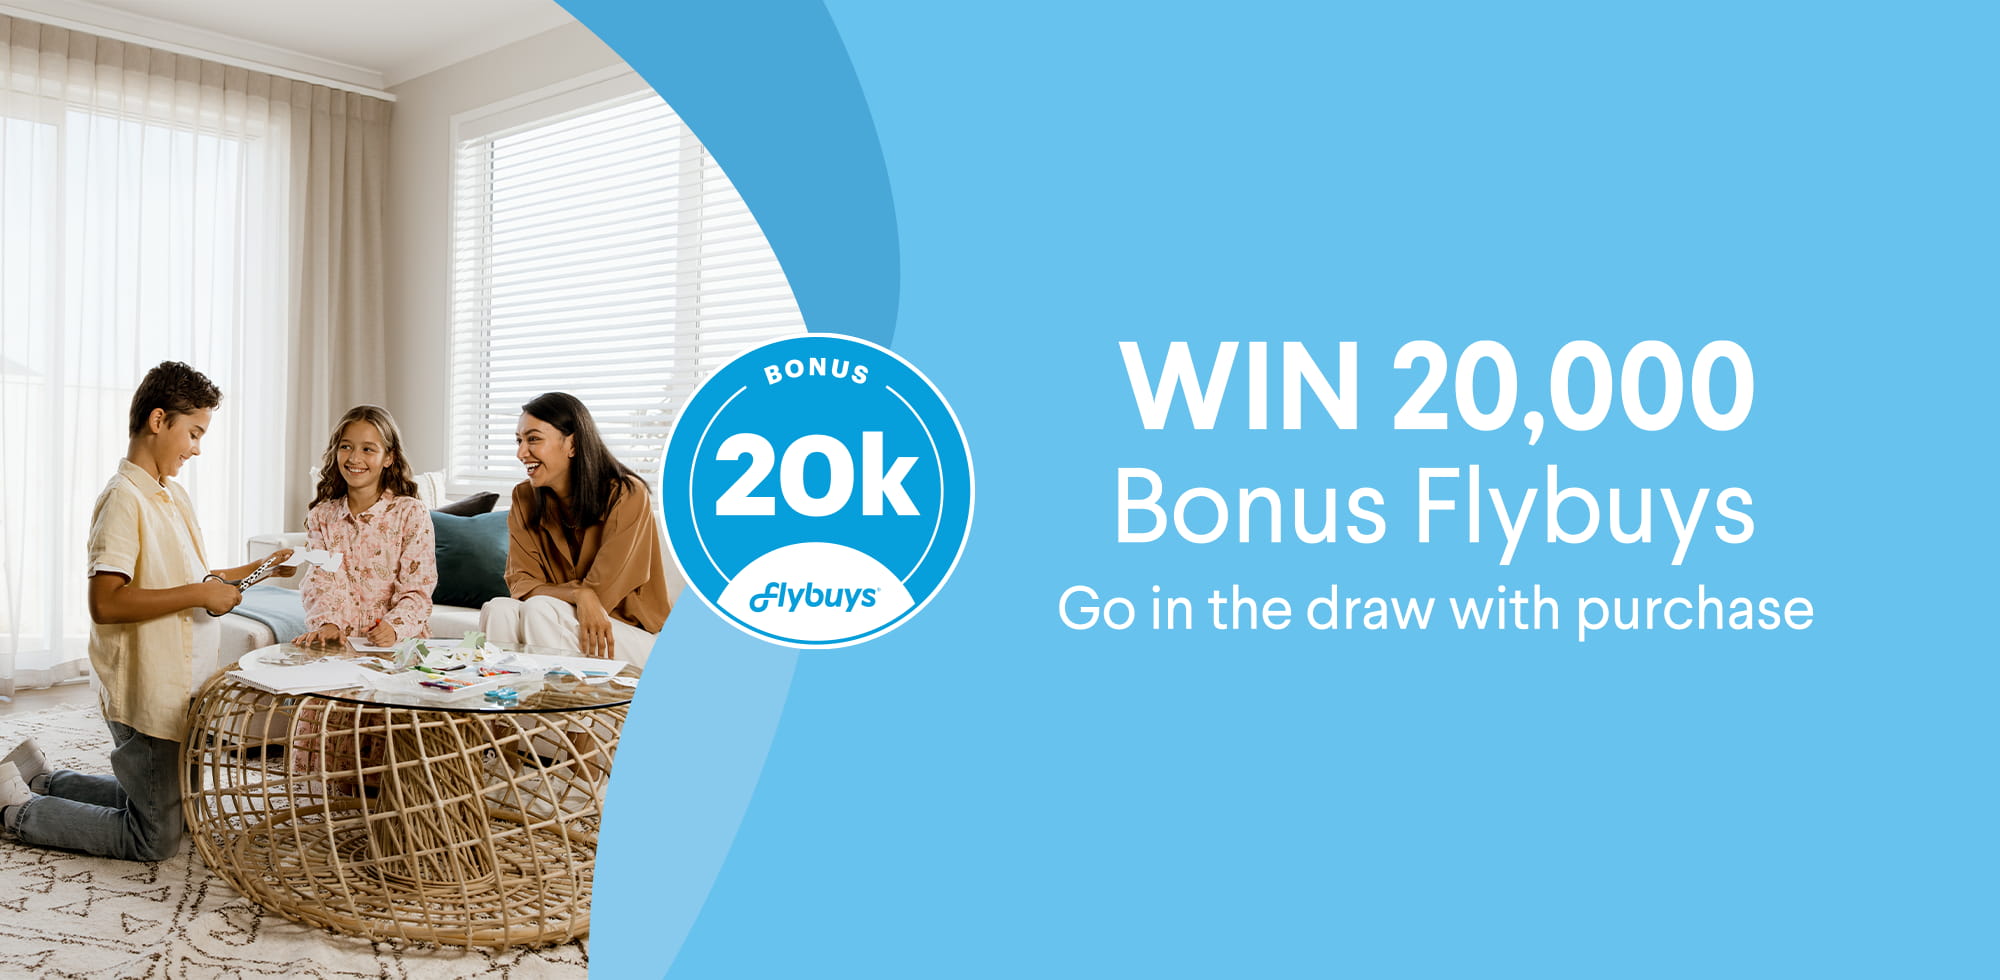 Go into the draw to win 20,000 Bonus Flybuys